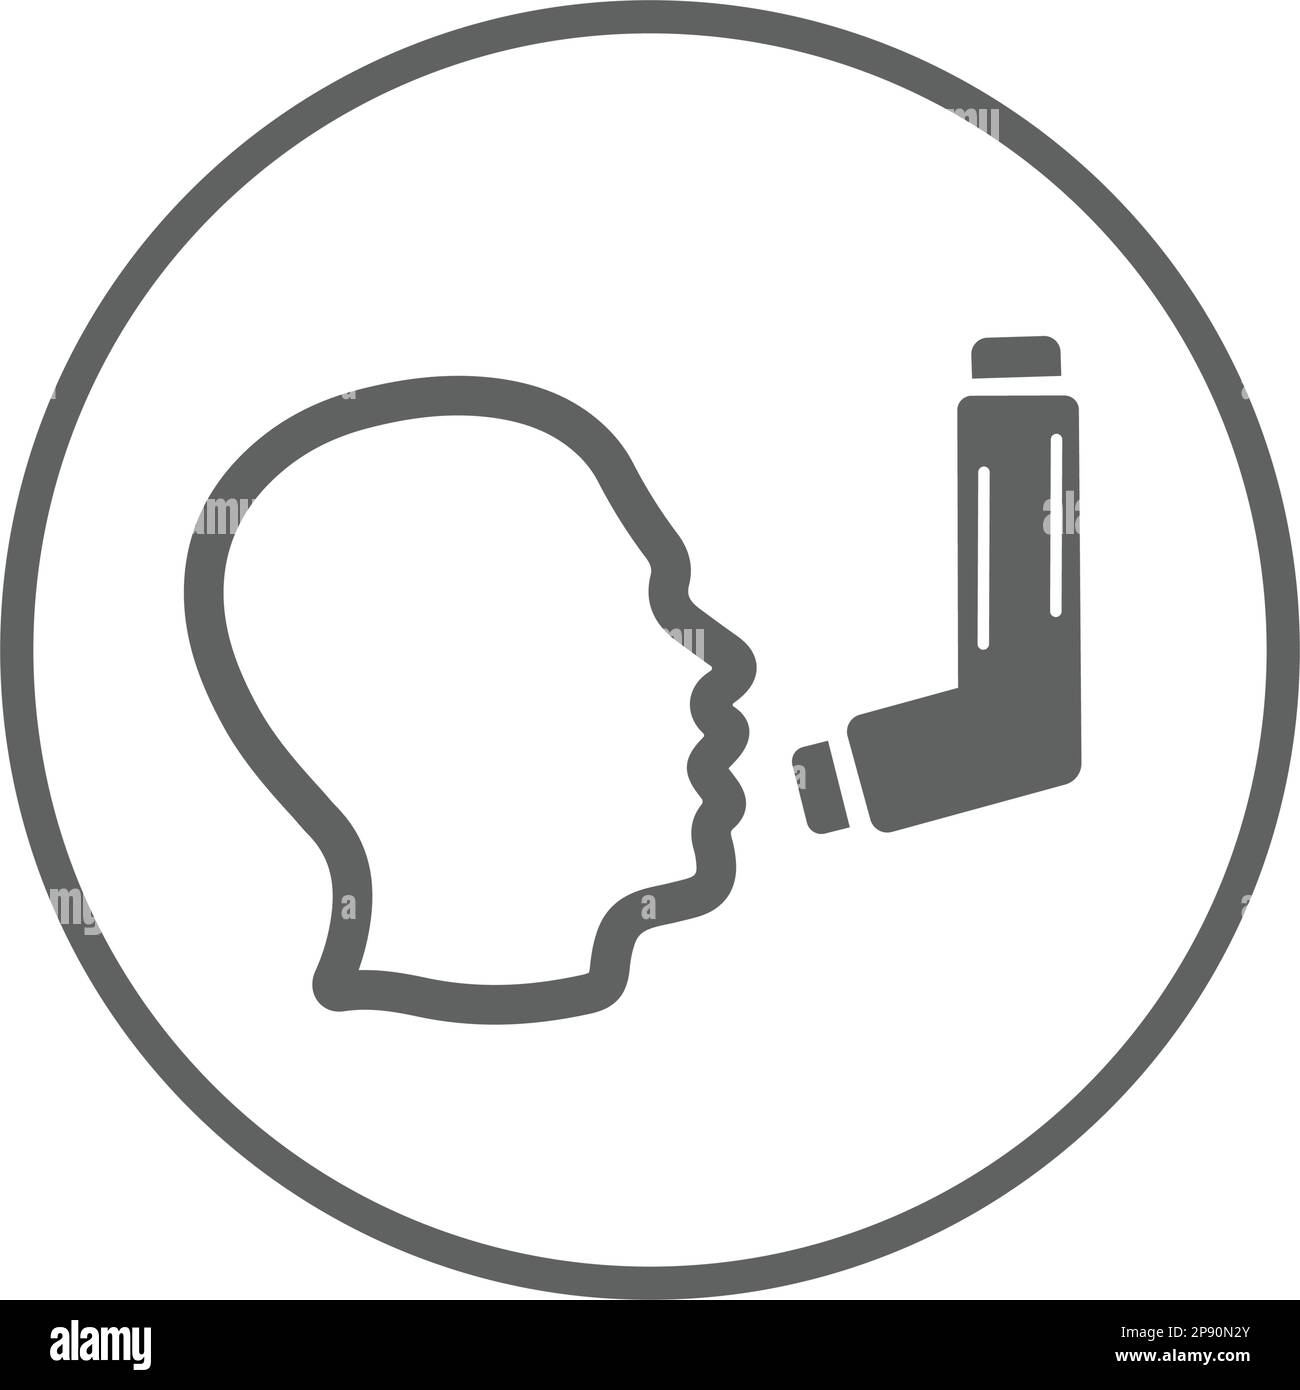 Asthma, breathing, inhaler icon. Use for commercial, print media, web or any type of design projects. Stock Vector